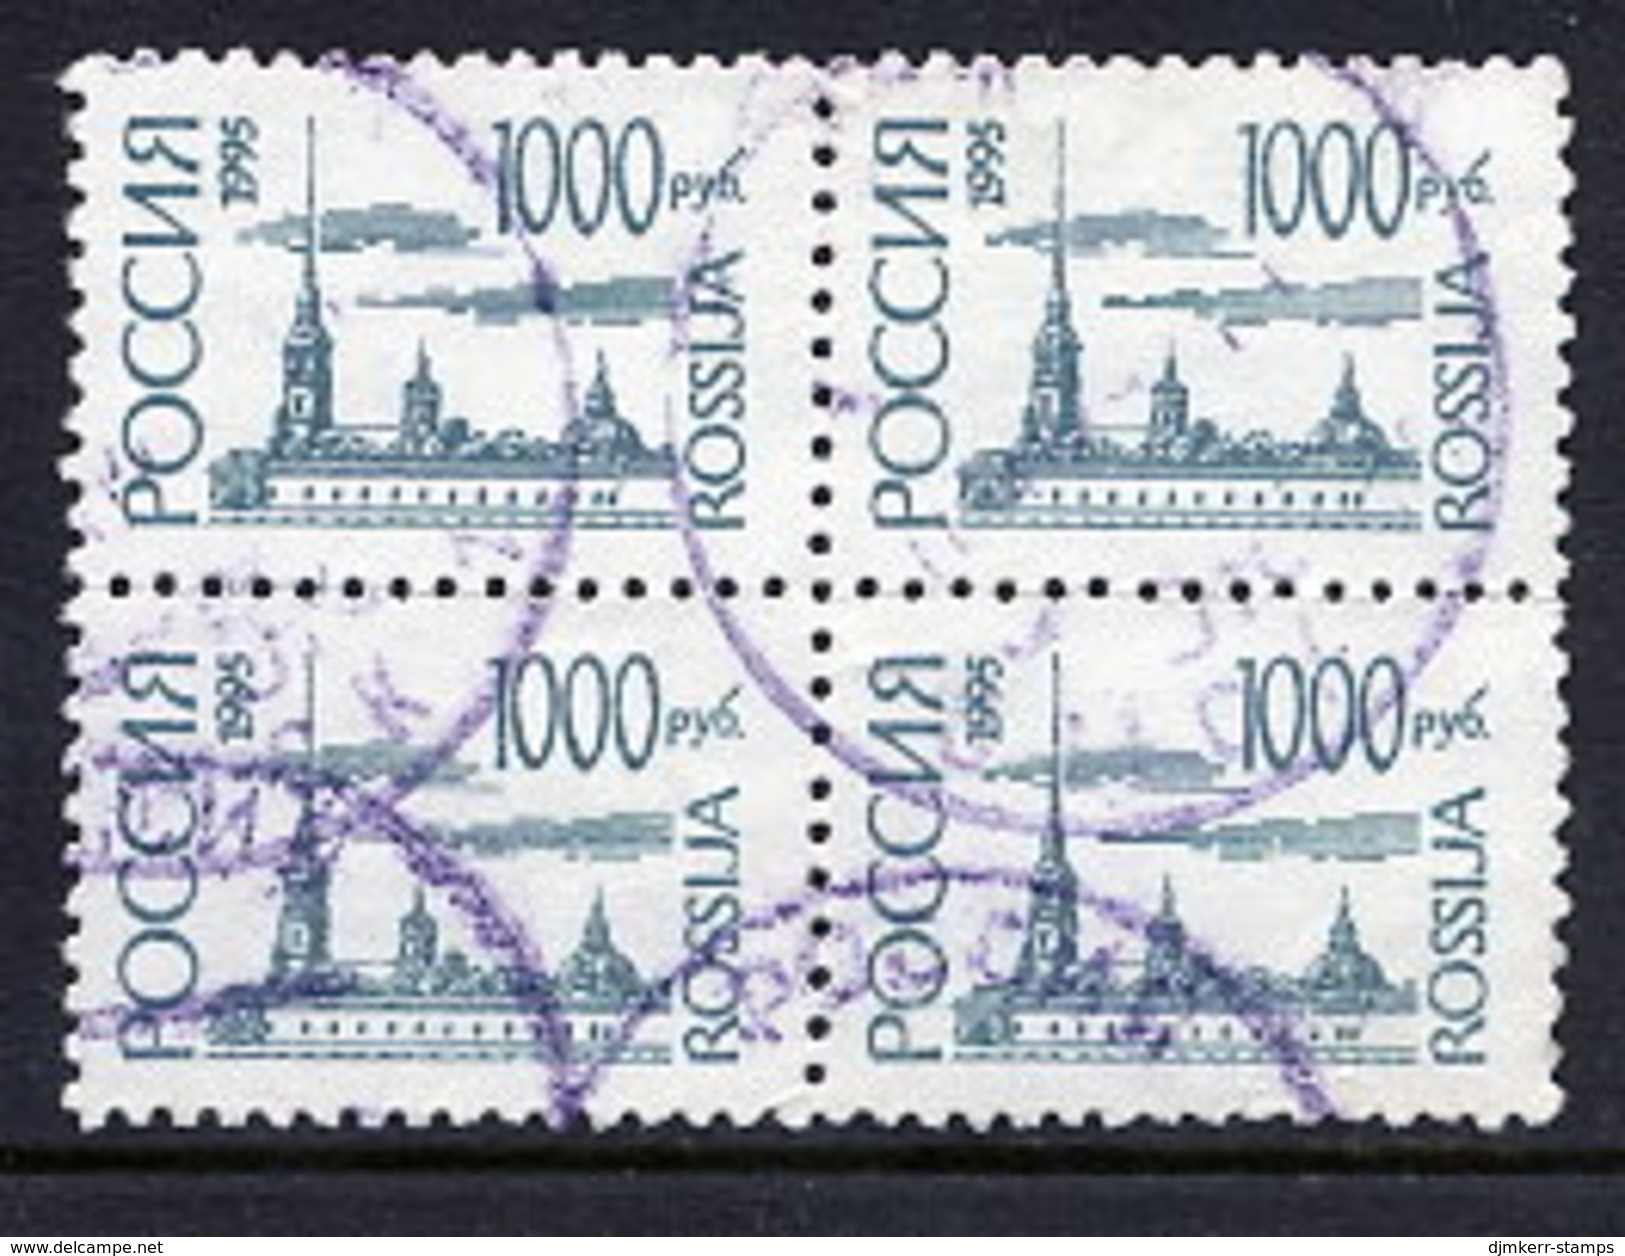 RUSSIAN FEDERATION 1995 Buildings Definitive 1000 R.  On Ordinary  Paper Block Of 4 Used.  Michel 414w - Usados